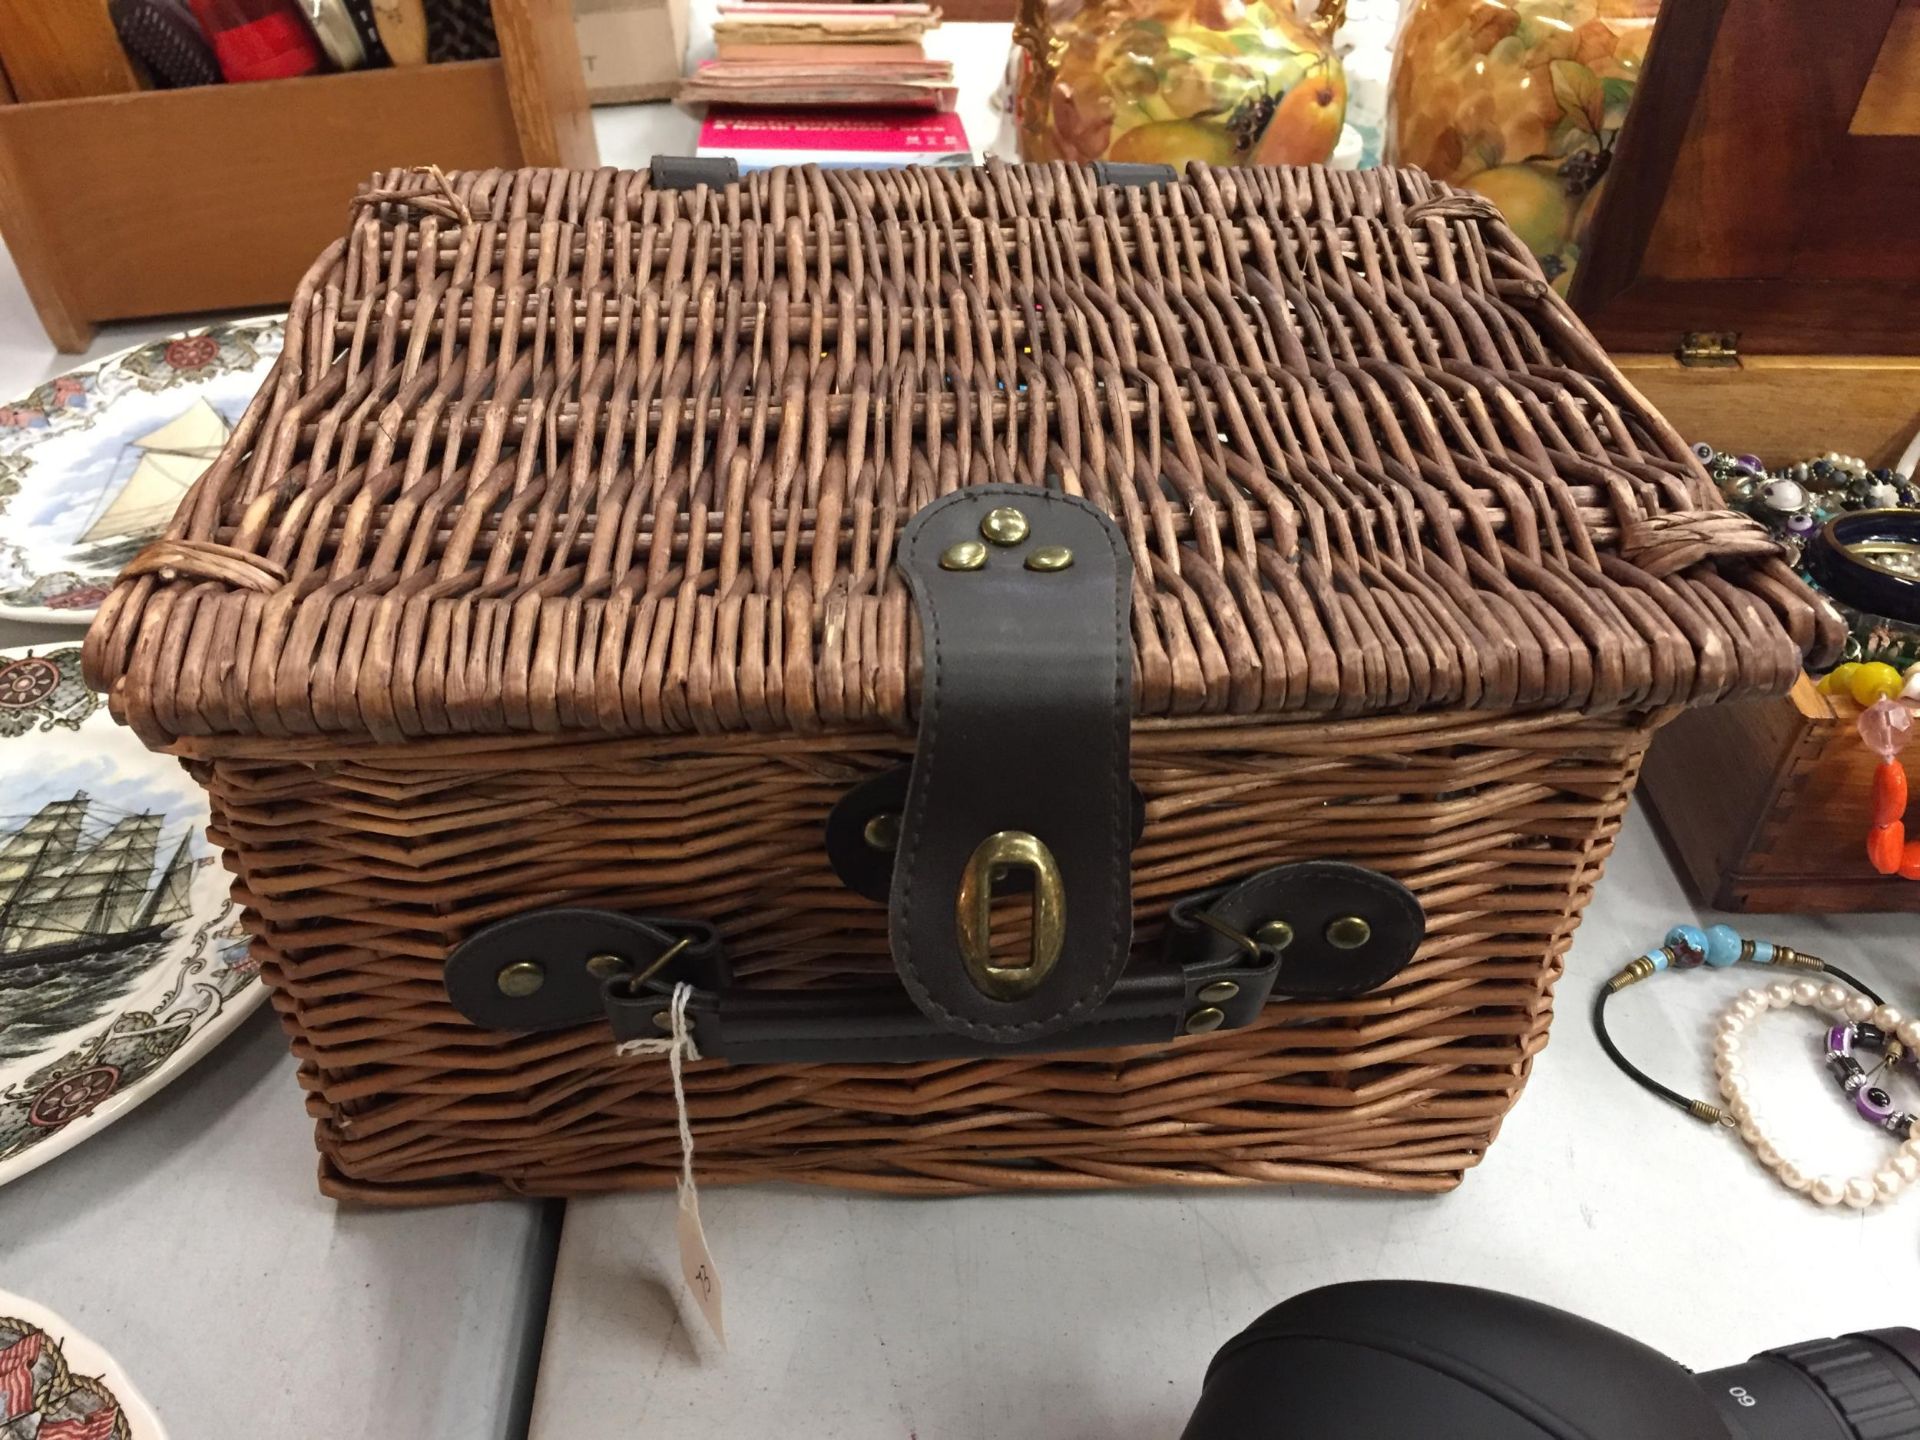 A WICKER PICNIC BASKET WITH PLATES, BOWLS AND CUPS